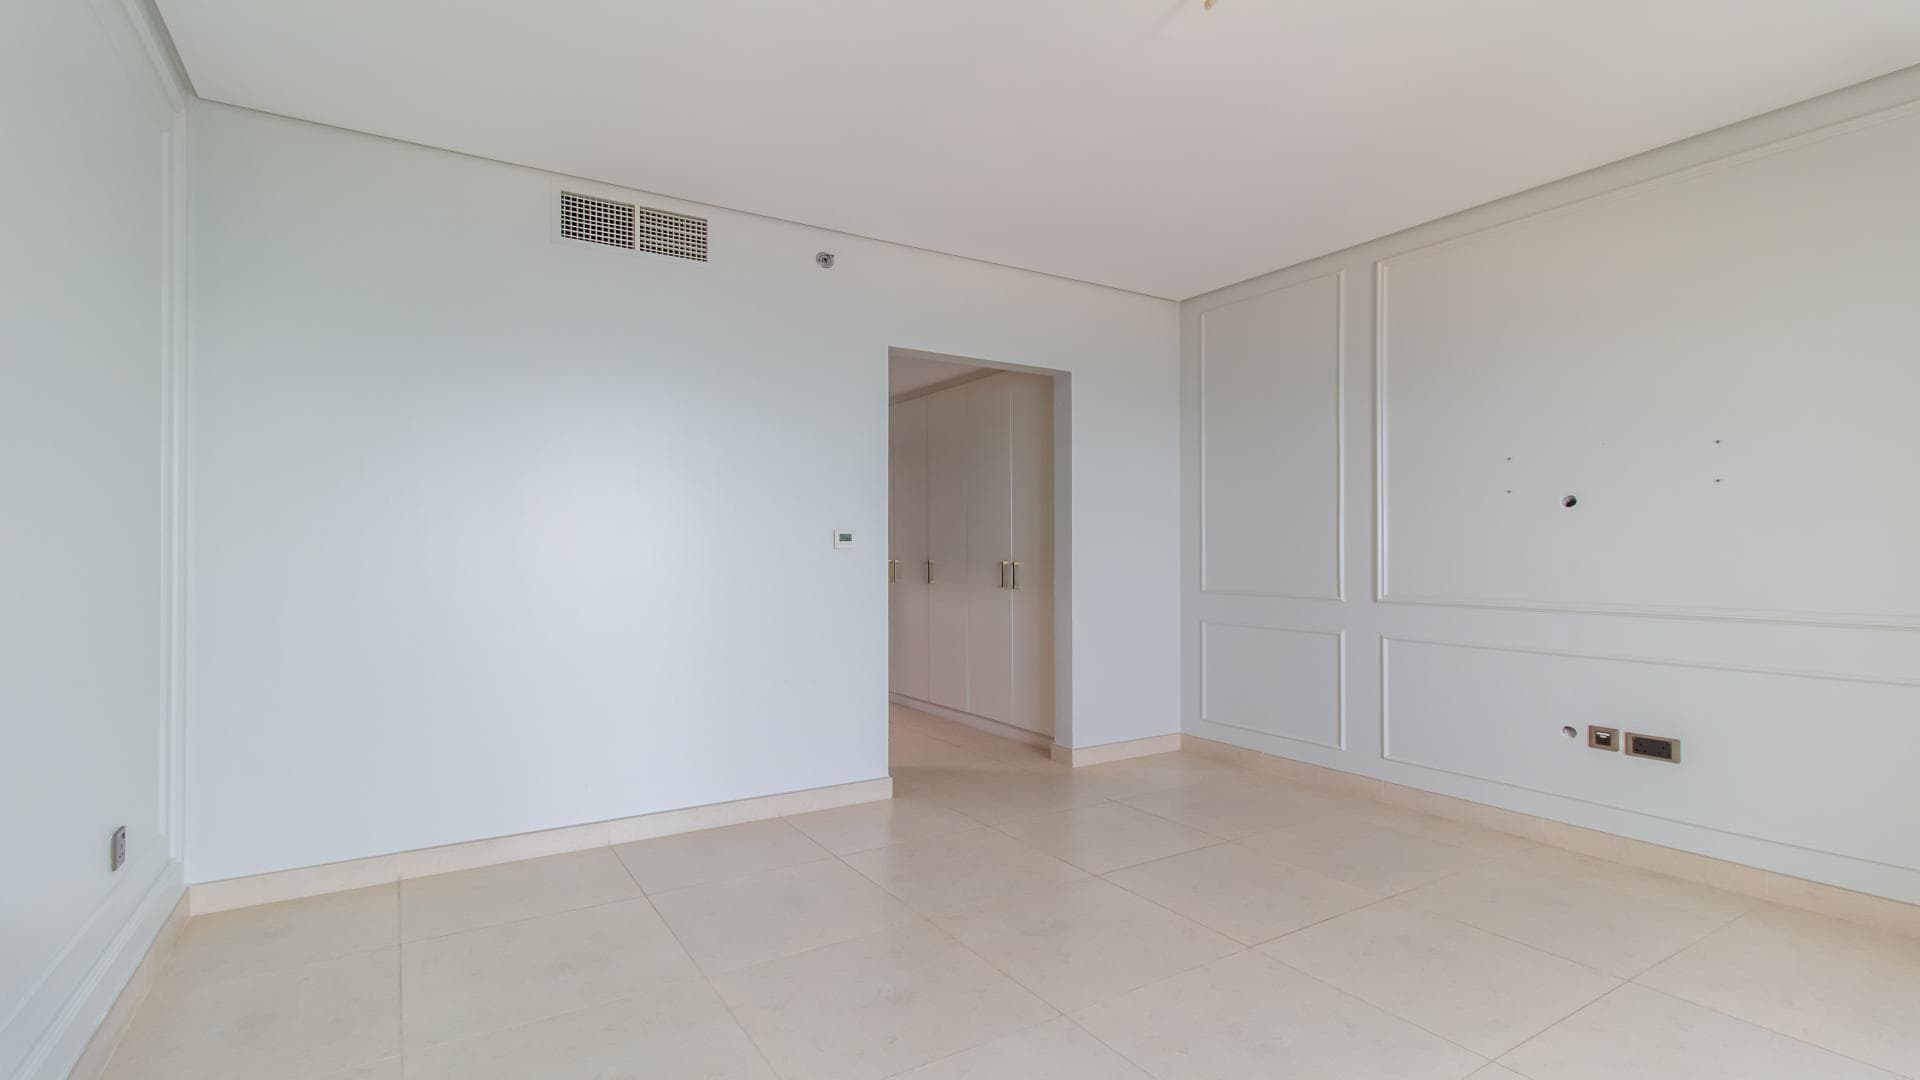 3 Bedroom Apartment For Rent Grand Residence Lp37307 3181306dcadf8000.jpg